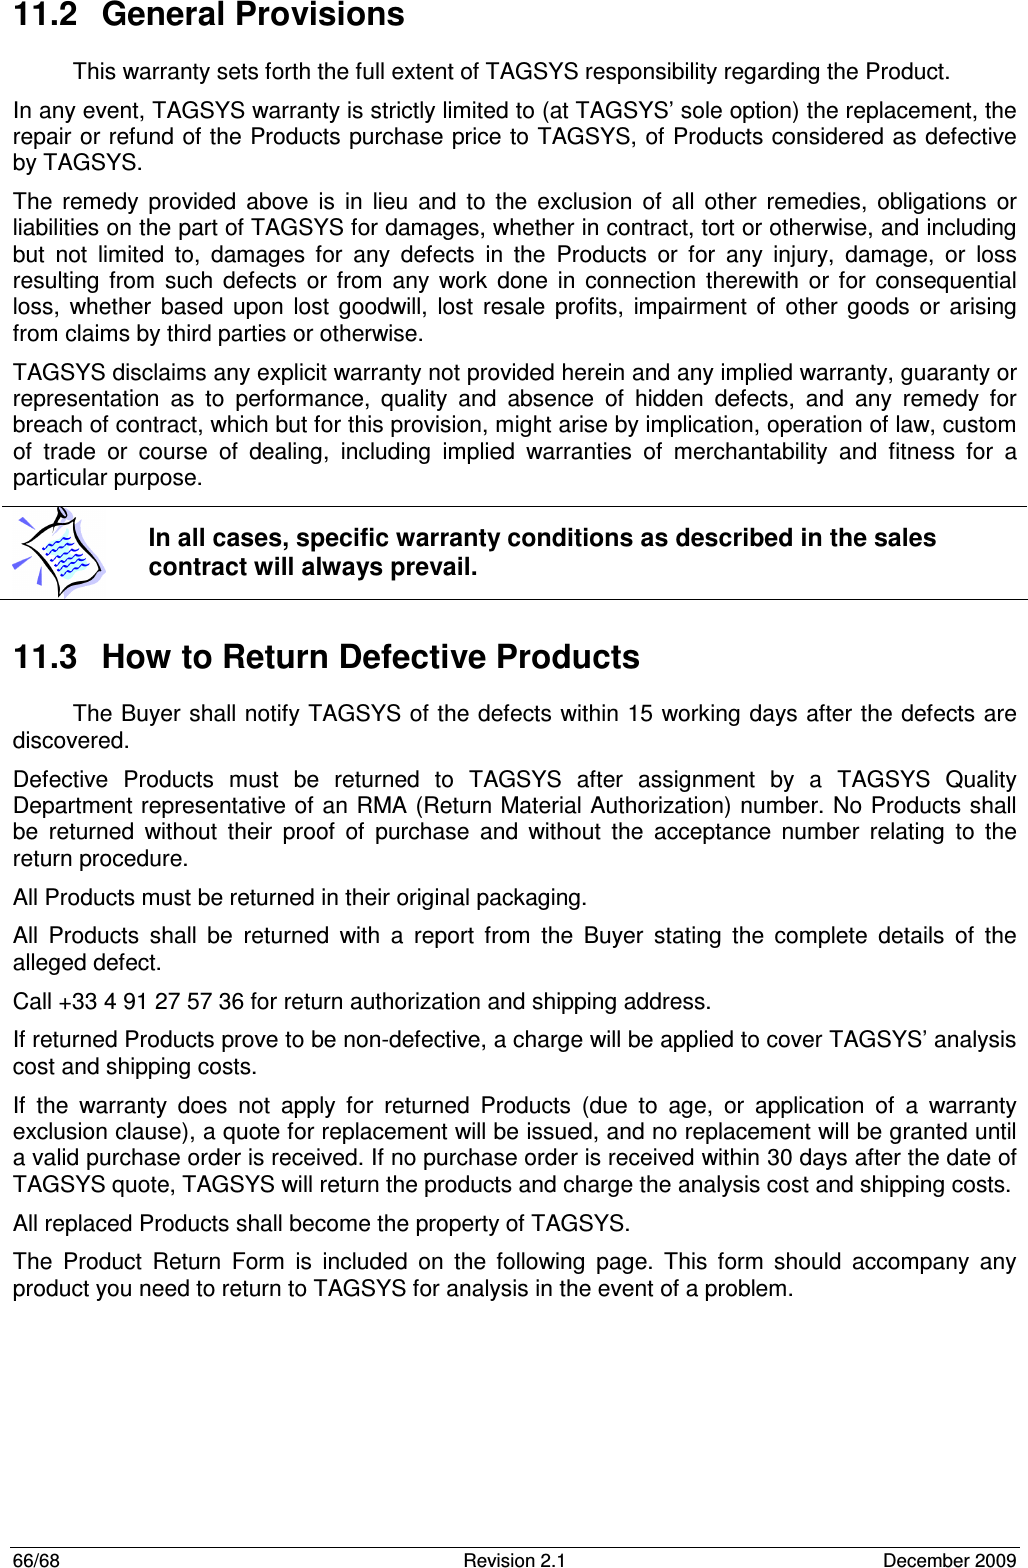  66/68  Revision 2.1  December 2009 11.2  General Provisions This warranty sets forth the full extent of TAGSYS responsibility regarding the Product. In any event, TAGSYS warranty is strictly limited to (at TAGSYS’ sole option) the replacement, the repair or refund of the Products purchase price to TAGSYS, of Products considered as defective by TAGSYS. The  remedy  provided  above  is  in  lieu  and  to  the  exclusion  of  all  other  remedies,  obligations  or liabilities on the part of TAGSYS for damages, whether in contract, tort or otherwise, and including but  not  limited  to,  damages  for  any  defects  in  the  Products  or  for  any  injury,  damage,  or  loss resulting  from  such  defects  or  from  any  work  done  in  connection  therewith  or  for  consequential loss,  whether  based  upon  lost  goodwill,  lost  resale  profits,  impairment  of  other  goods  or  arising from claims by third parties or otherwise. TAGSYS disclaims any explicit warranty not provided herein and any implied warranty, guaranty or representation  as  to  performance,  quality  and  absence  of  hidden  defects,  and  any  remedy  for breach of contract, which but for this provision, might arise by implication, operation of law, custom of  trade  or  course  of  dealing,  including  implied  warranties  of  merchantability  and  fitness  for  a particular purpose. 11.3  How to Return Defective Products The Buyer shall notify TAGSYS of the defects within 15 working days after the defects are discovered. Defective  Products  must  be  returned  to  TAGSYS  after  assignment  by  a  TAGSYS  Quality Department representative of an RMA (Return Material Authorization) number. No Products shall be  returned  without  their  proof  of  purchase  and  without  the  acceptance  number  relating  to  the return procedure. All Products must be returned in their original packaging. All  Products  shall  be  returned  with  a  report  from  the  Buyer  stating  the  complete  details  of  the alleged defect. Call +33 4 91 27 57 36 for return authorization and shipping address. If returned Products prove to be non-defective, a charge will be applied to cover TAGSYS’ analysis cost and shipping costs. If  the  warranty  does  not  apply  for  returned  Products  (due  to  age,  or  application  of  a  warranty exclusion clause), a quote for replacement will be issued, and no replacement will be granted until a valid purchase order is received. If no purchase order is received within 30 days after the date of TAGSYS quote, TAGSYS will return the products and charge the analysis cost and shipping costs. All replaced Products shall become the property of TAGSYS. The  Product  Return  Form  is  included  on  the  following  page.  This  form  should  accompany  any product you need to return to TAGSYS for analysis in the event of a problem.      In all cases, specific warranty conditions as described in the sales contract will always prevail. 